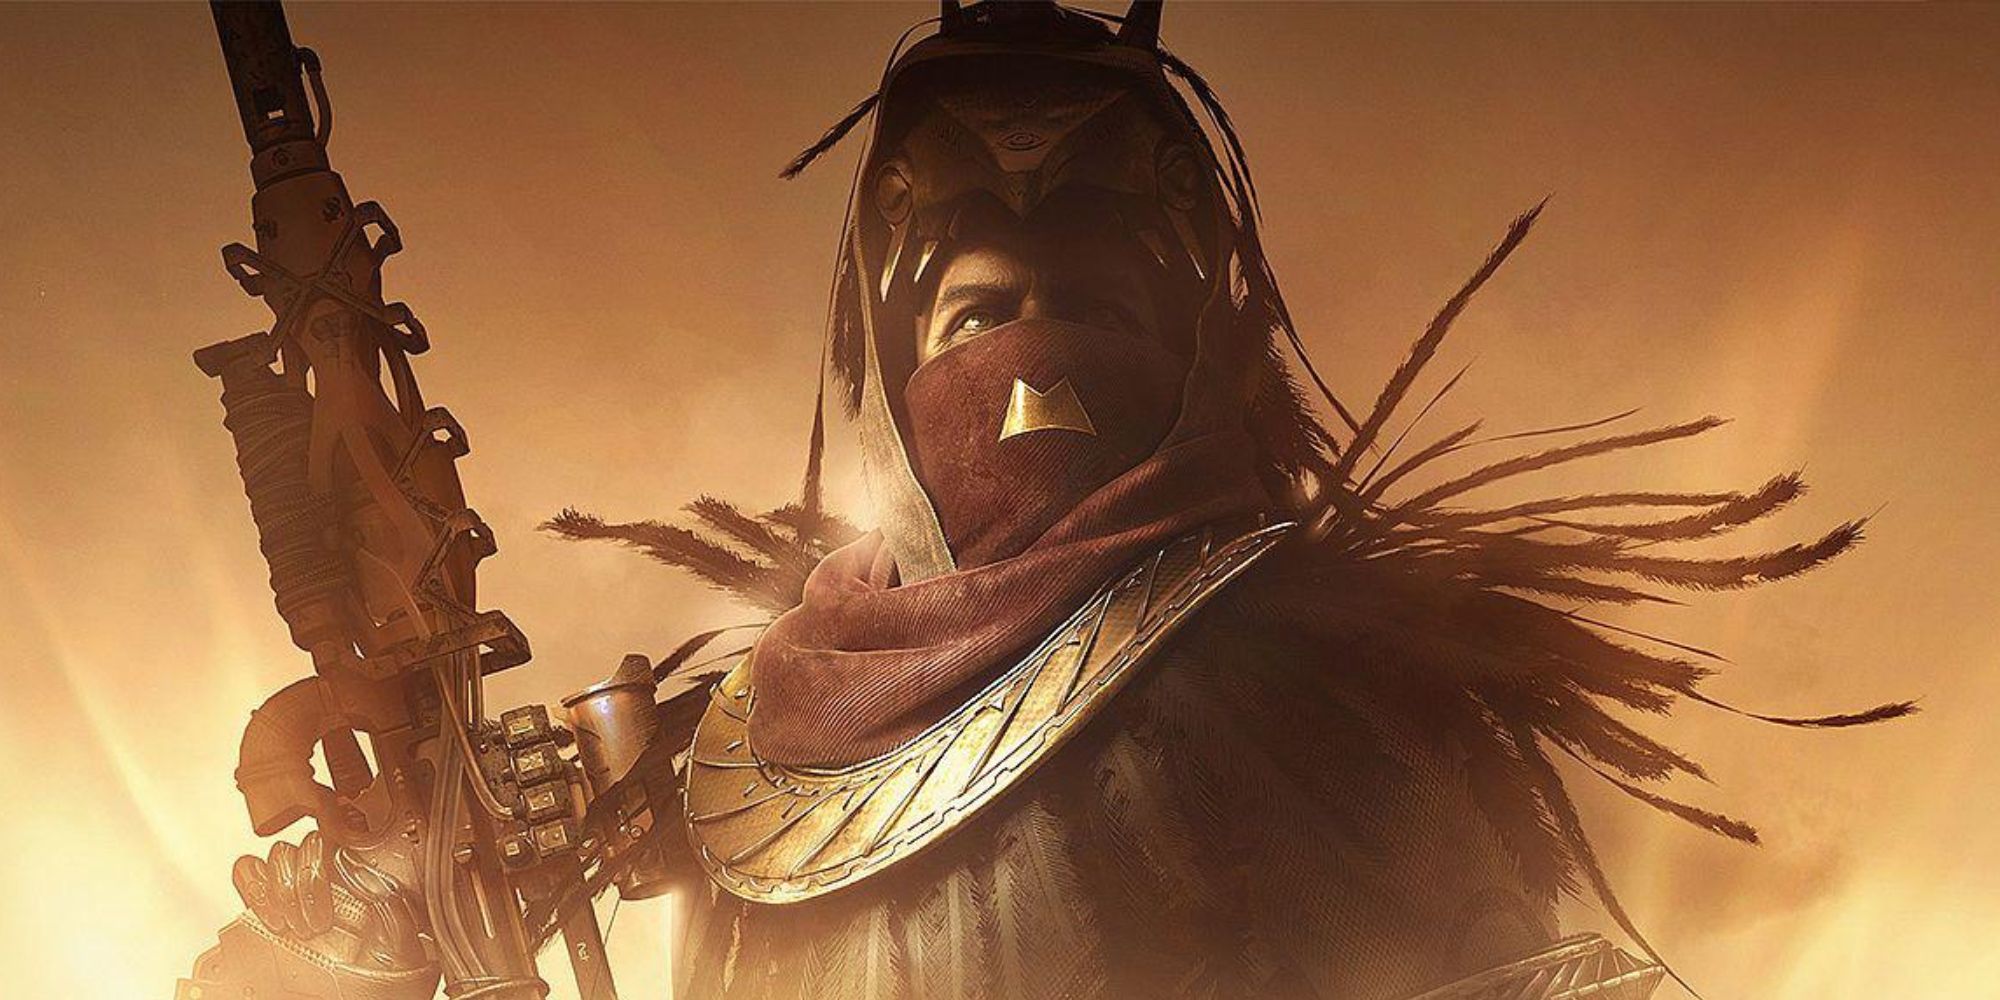 Destiny close up of Osiris holding a rifle with his hood up against a glowing orange backdrop